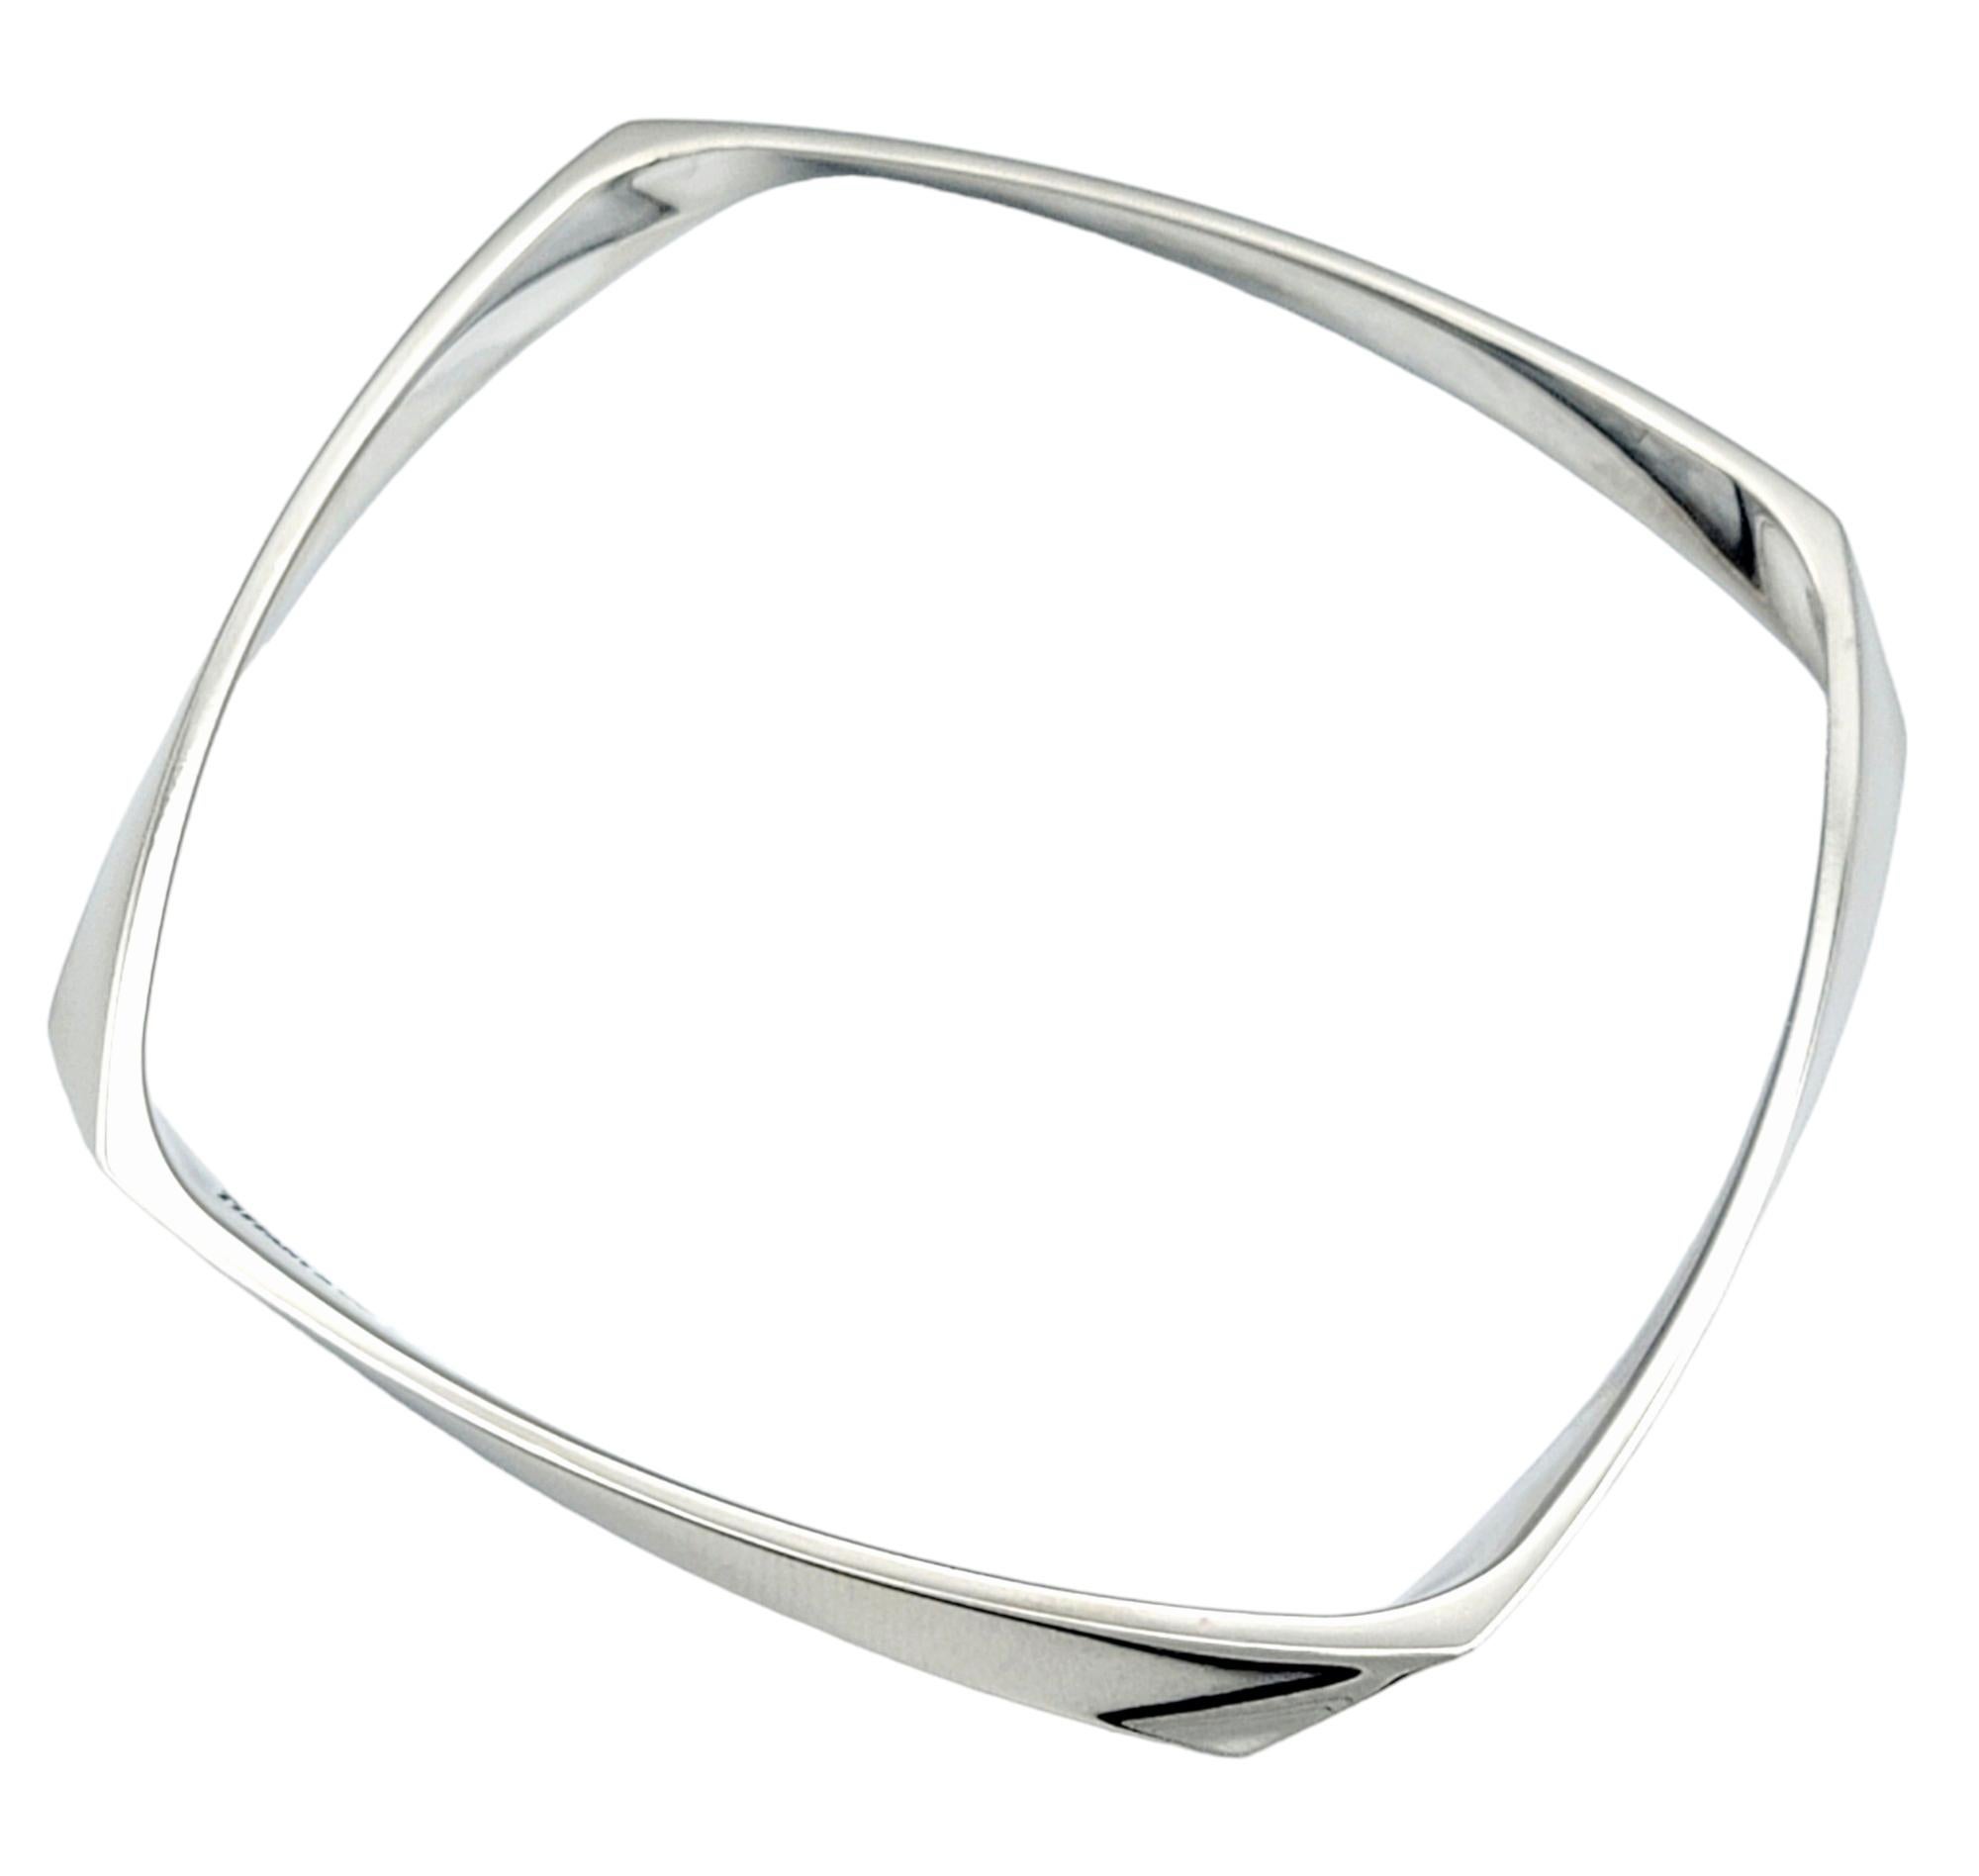 This Tiffany & Co. bracelet, designed by Frank Gehry and set in 18 karat white gold, showcases a unique and modern aesthetic. The squared bangle features an intriguing twist design, adding an element of dynamic movement to the piece. The absence of